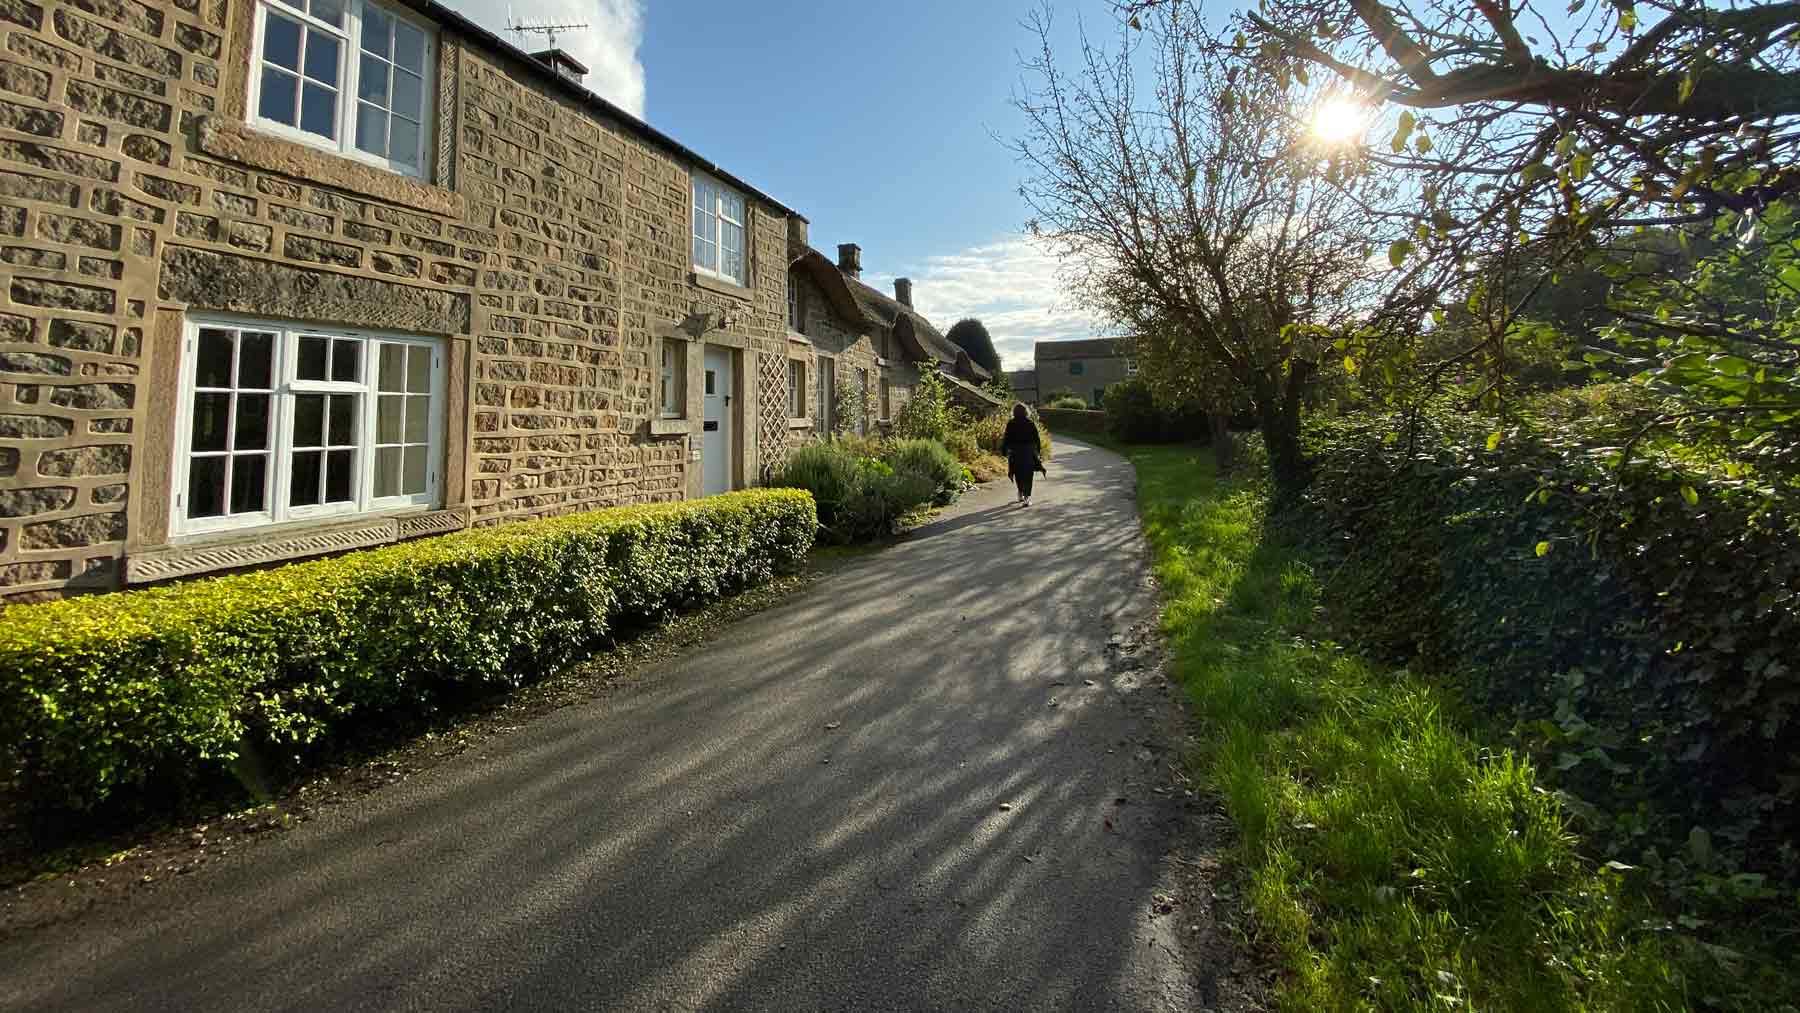 Stone cottages in Baslow, Peak District